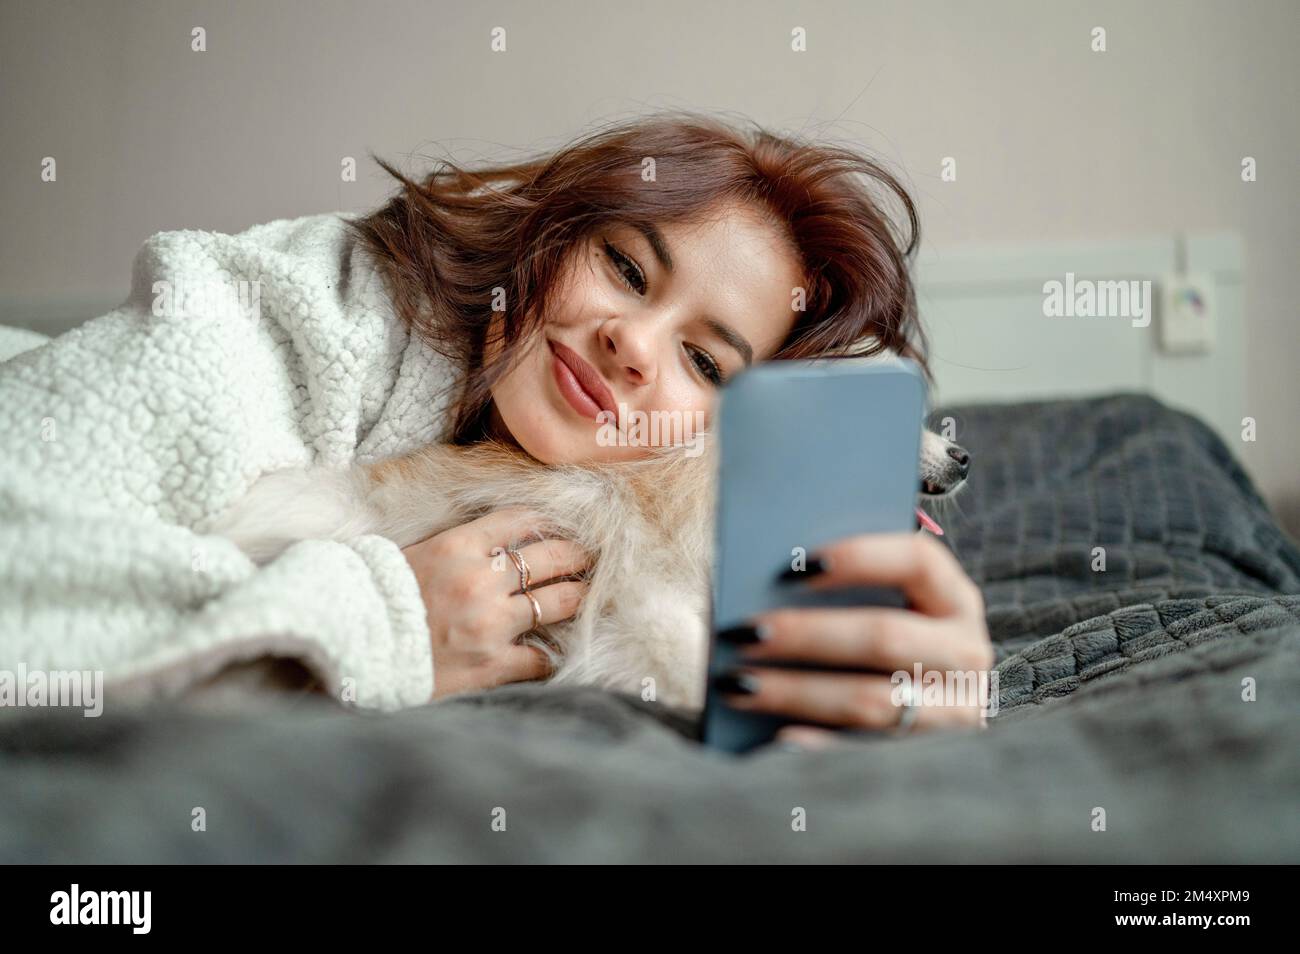 Smiling woman stroking Pomeranian dog and using smart phone at home Stock Photo